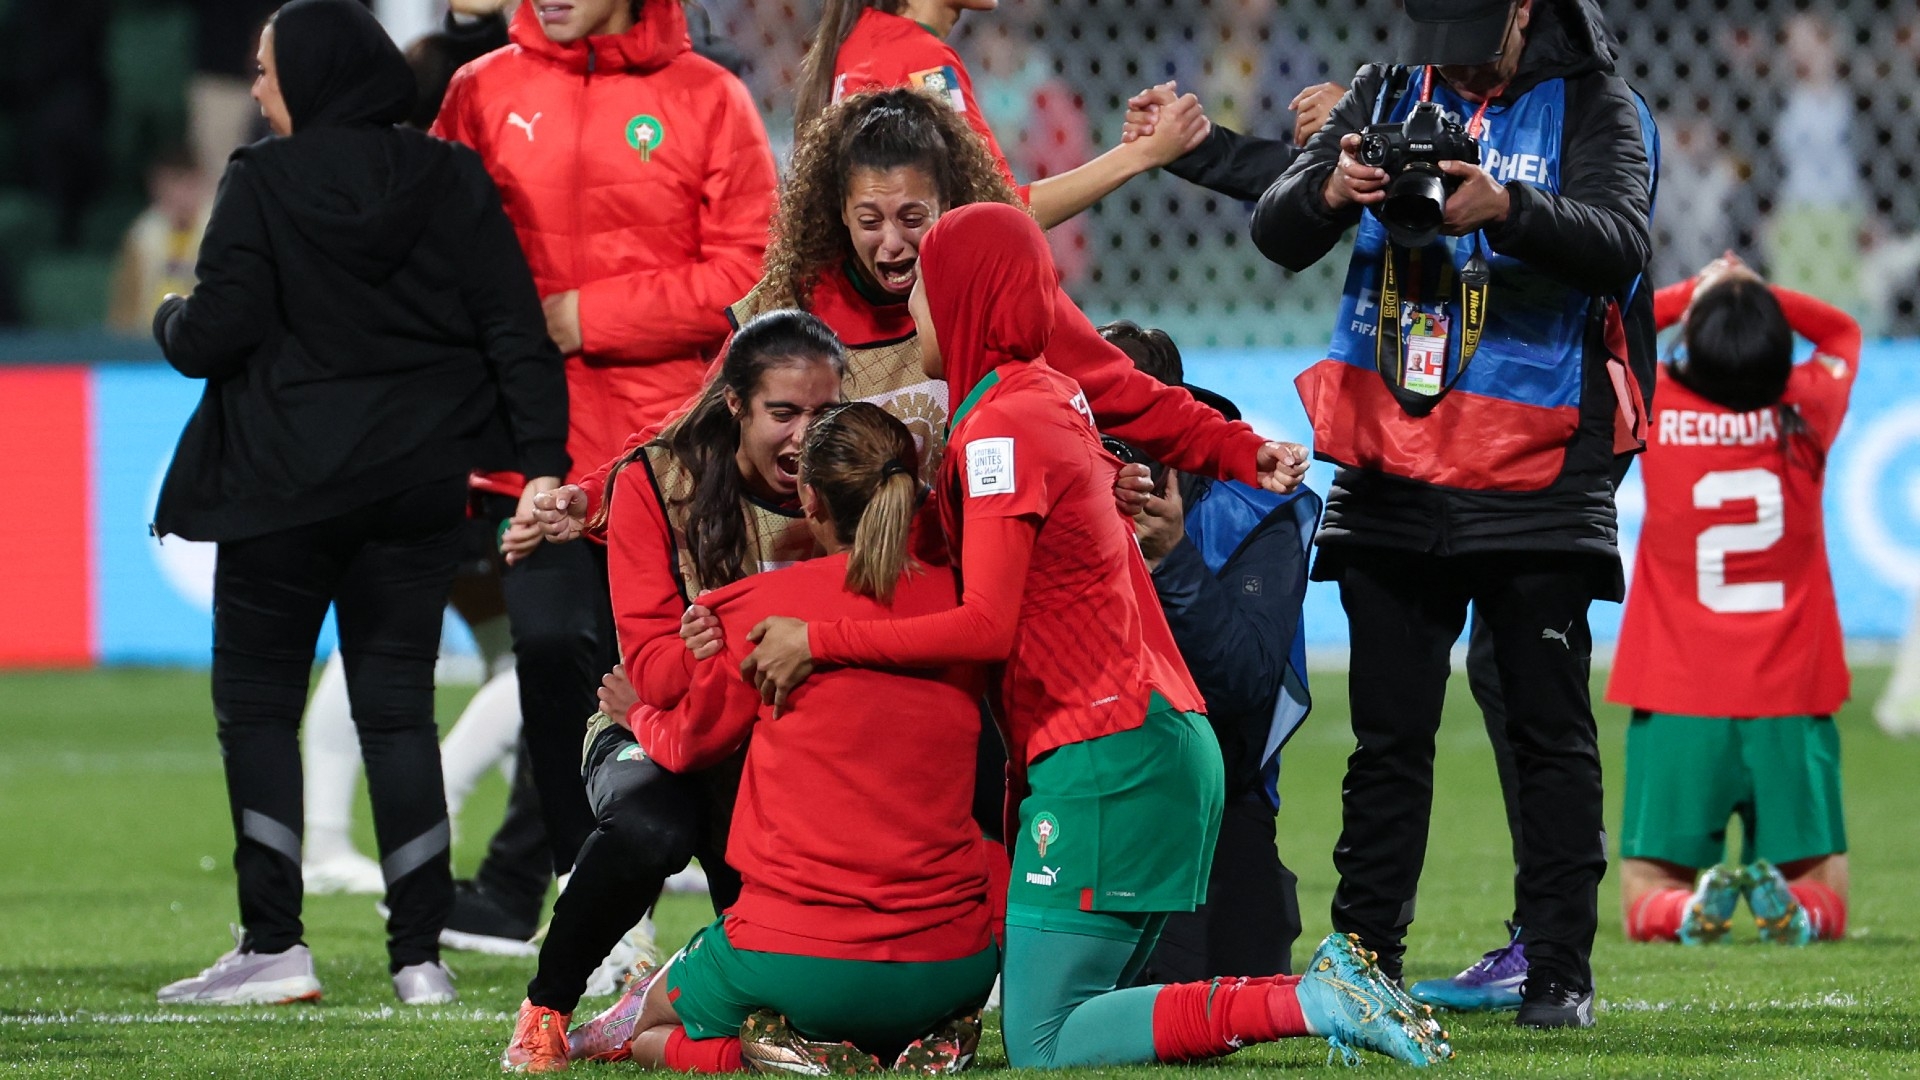 Morocco players celebrate after beating Colombia 1-0 during a 2023 Women's World Cup group match at Perth Rectangular Stadium in Perth, Australia on 3 August 2023 (AFP)